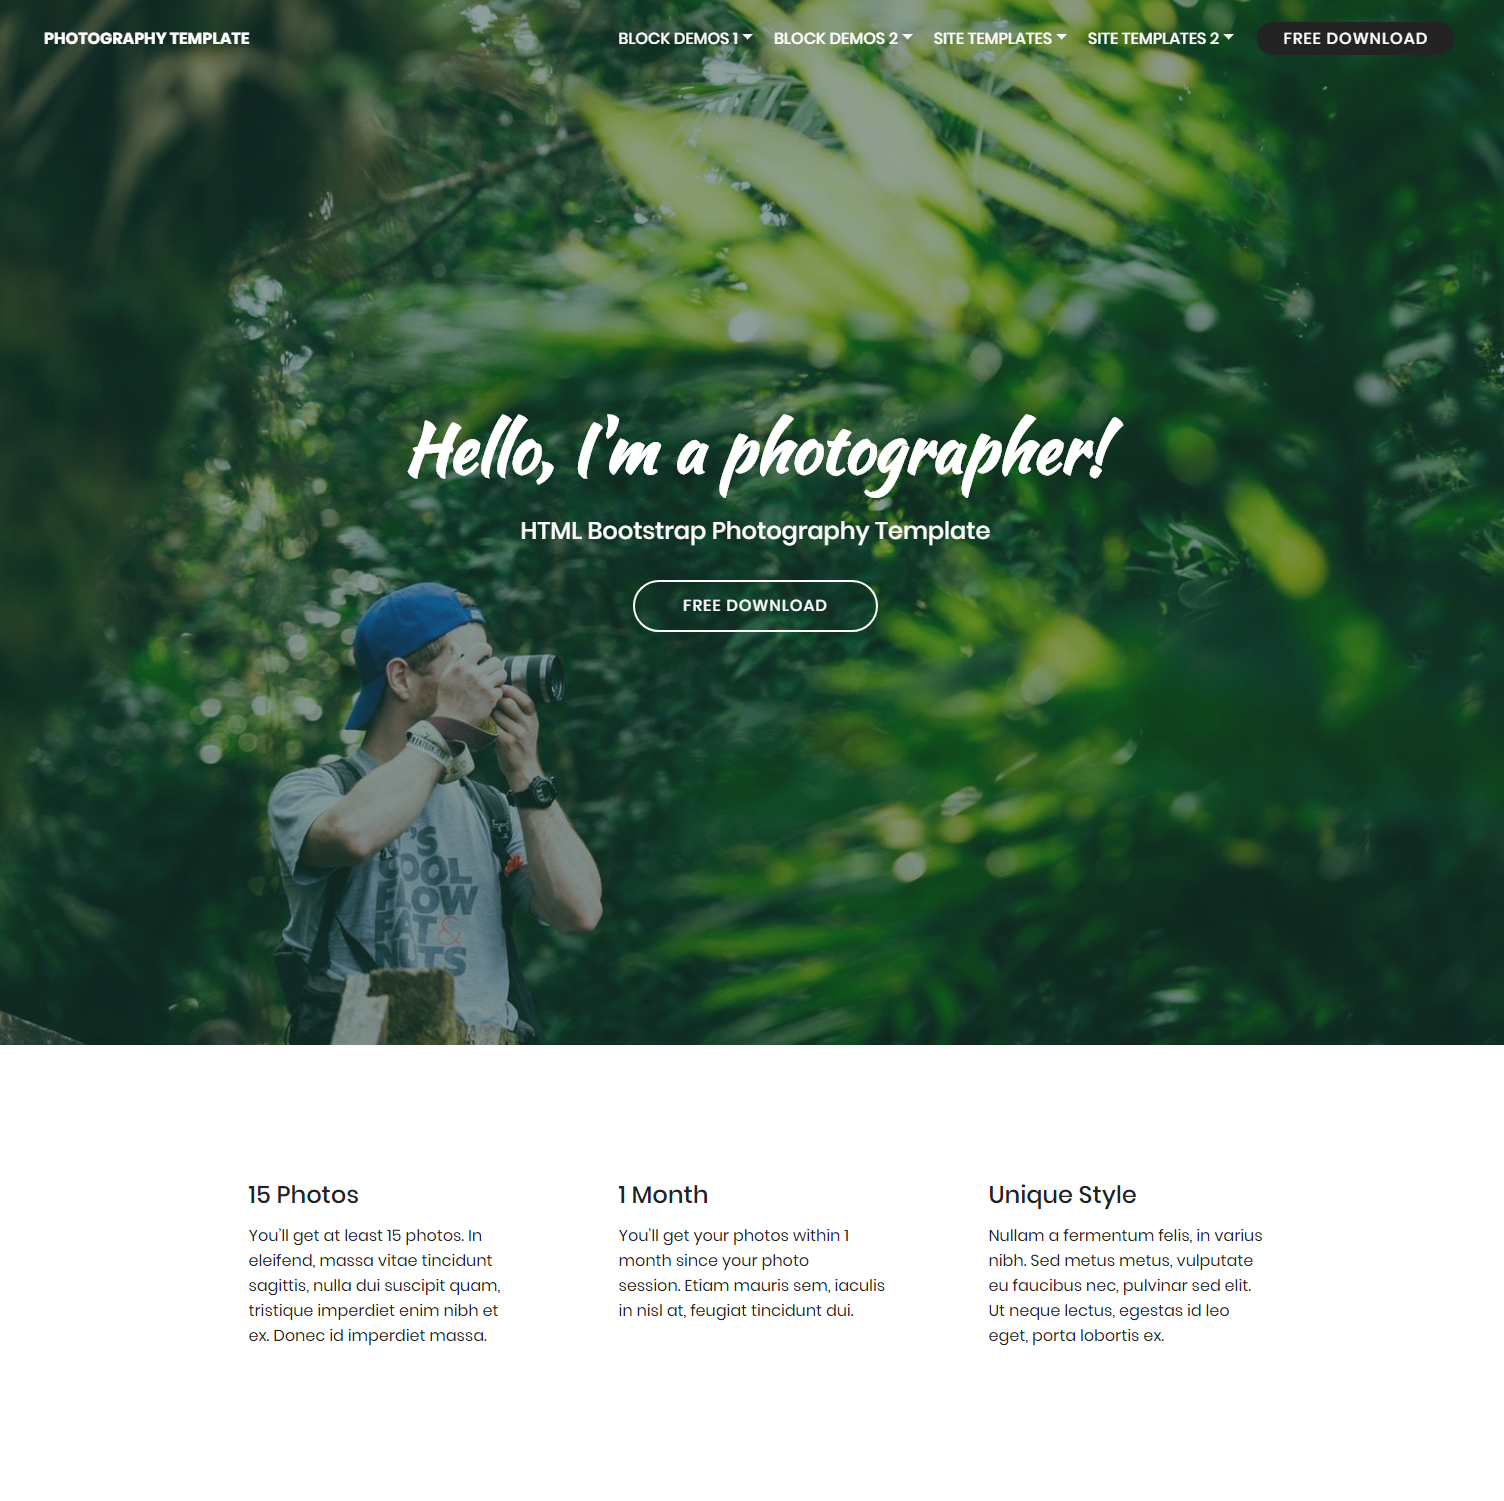 HTML5 Bootstrap Photography Templates